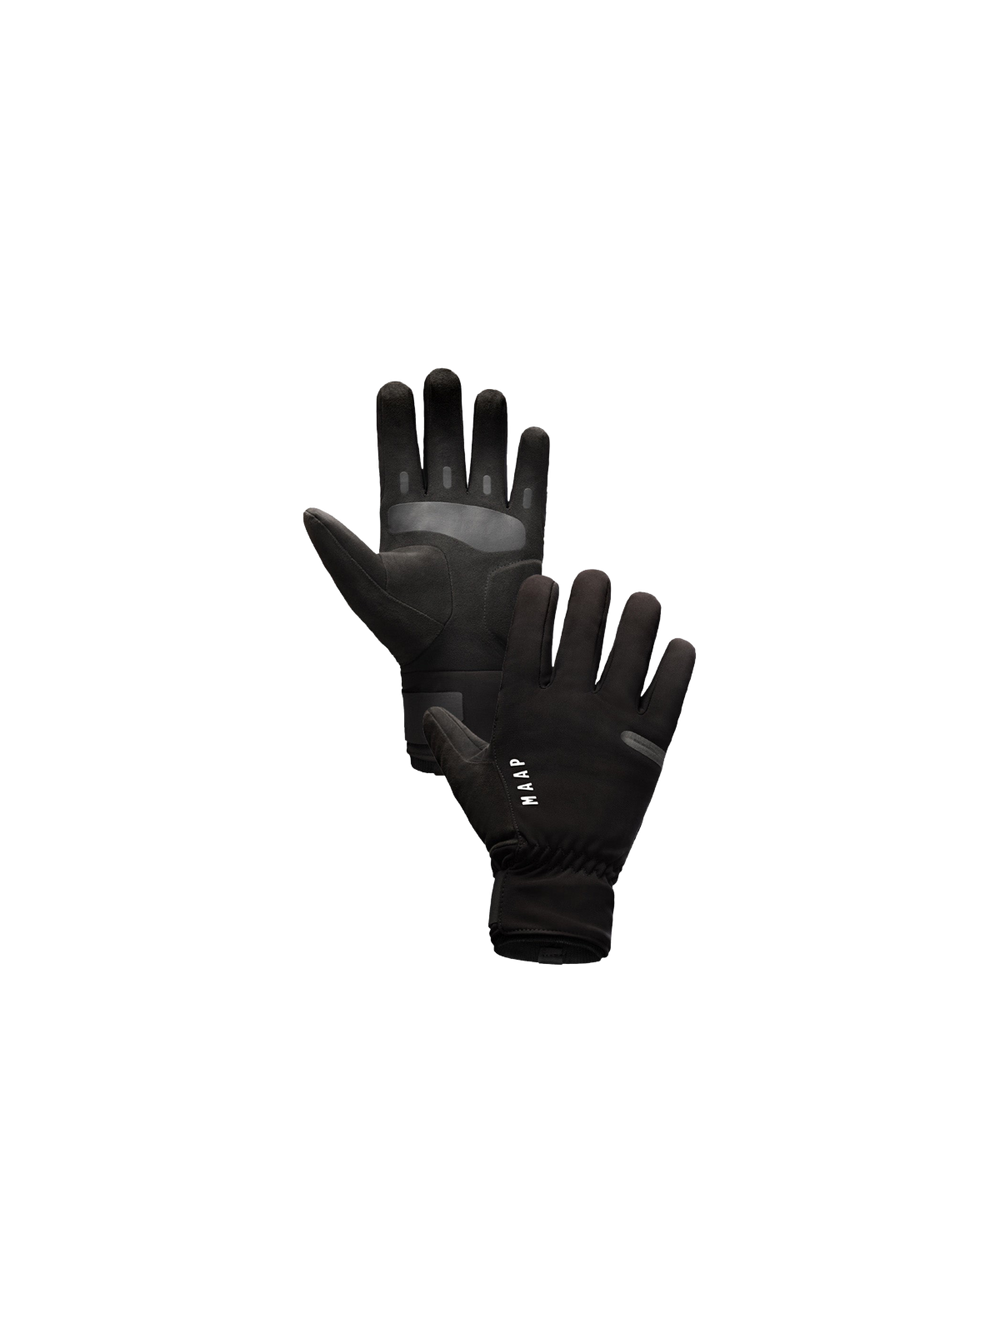 Product Image for Apex Deep Winter Glove